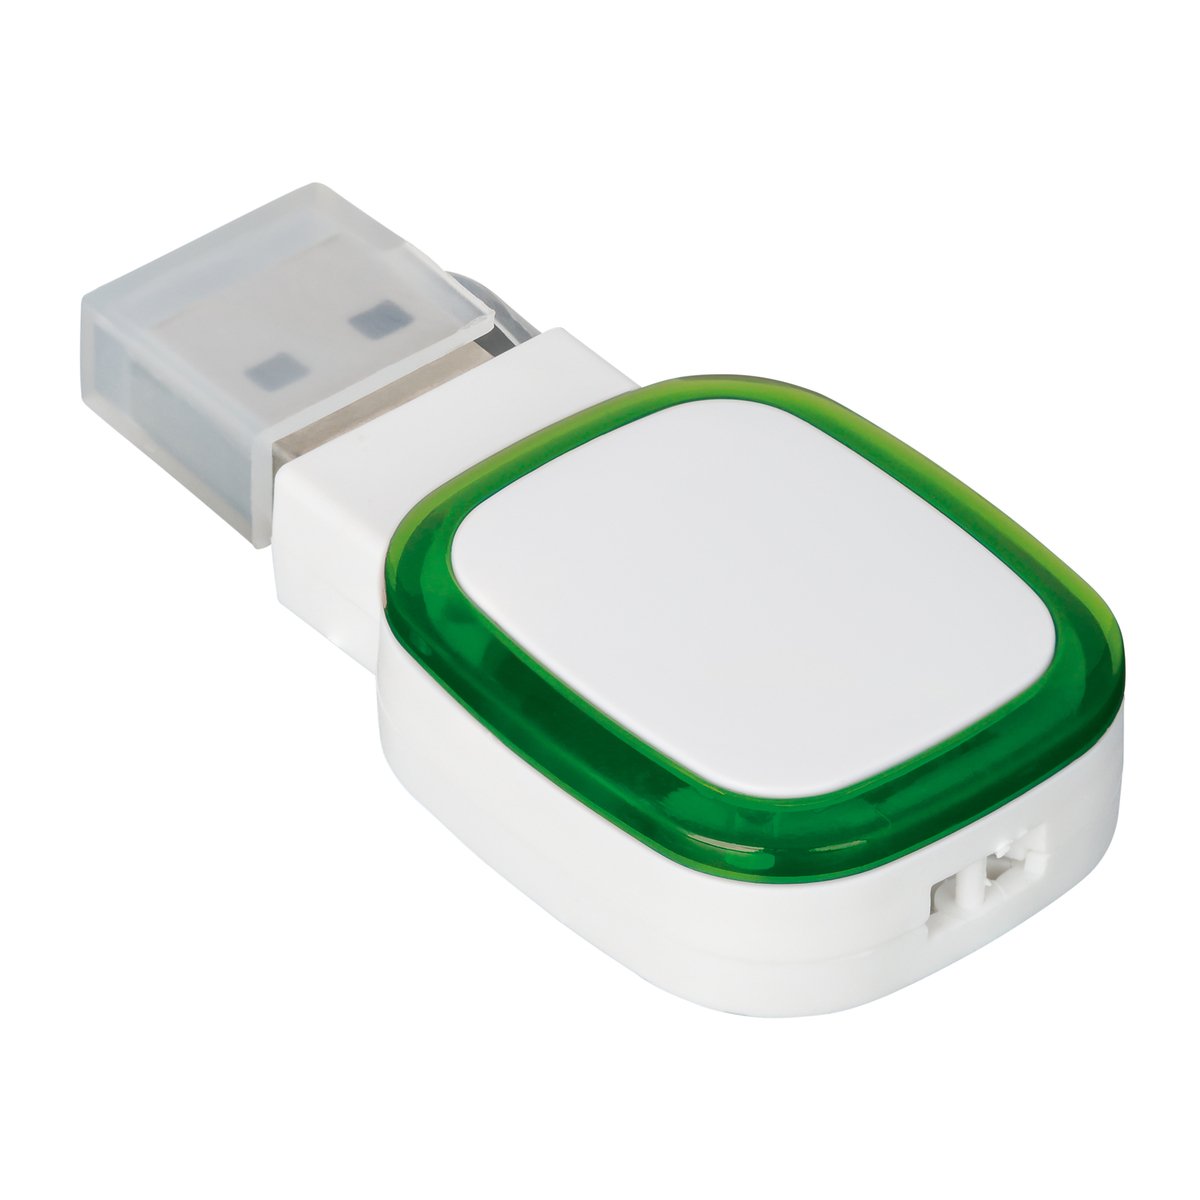 USB flash drive COLLECTION 500 green 8GB